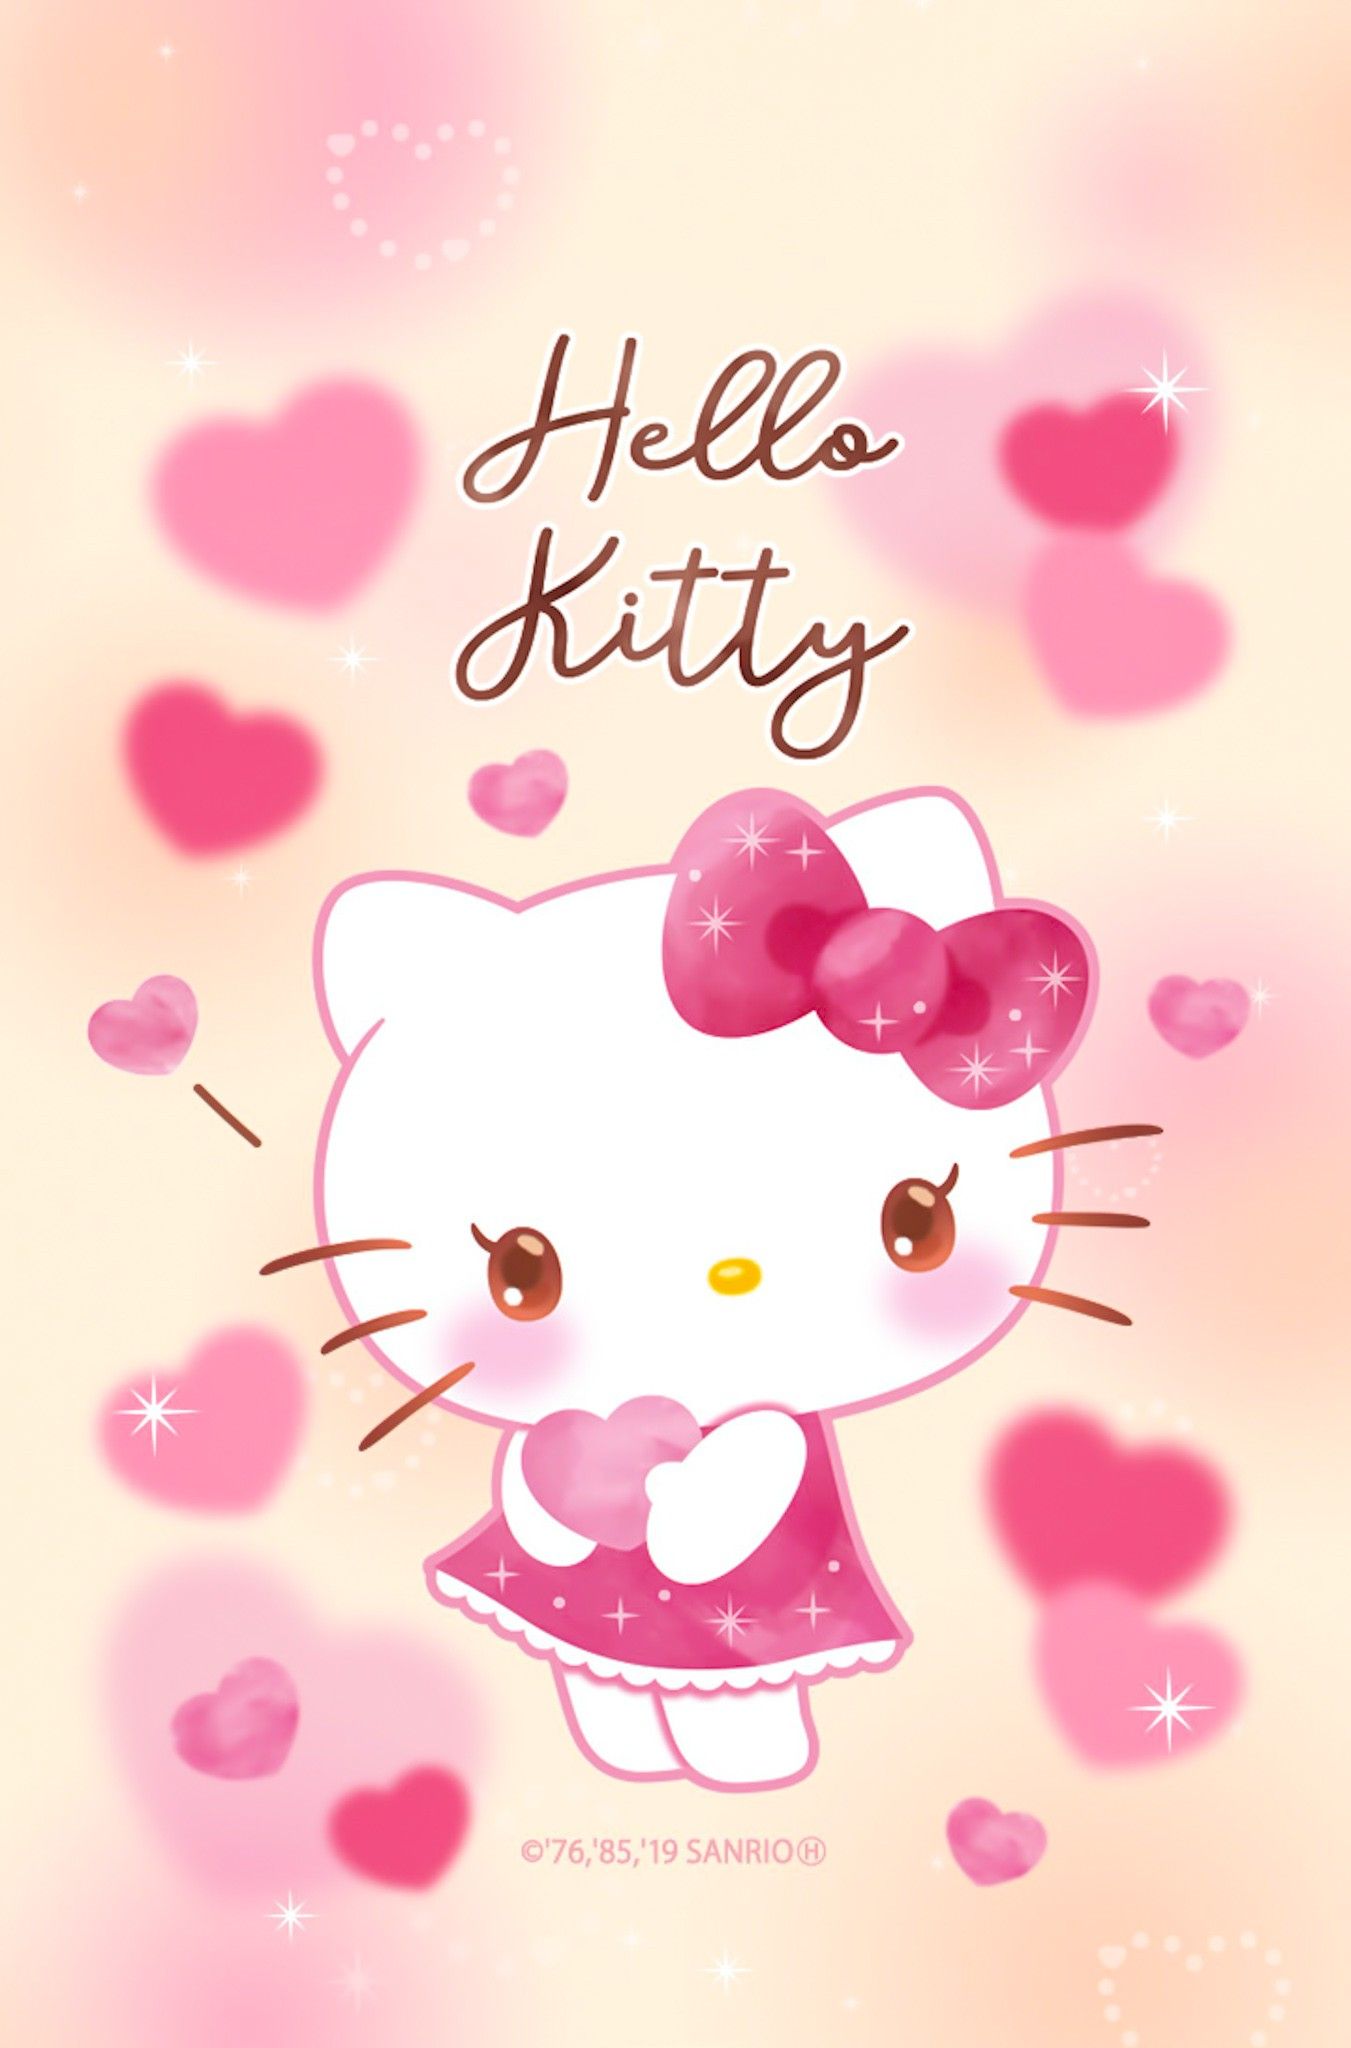 Cute Hello Kitty - Pink Background Wallpaper Download, hello kitty  wallpaper 